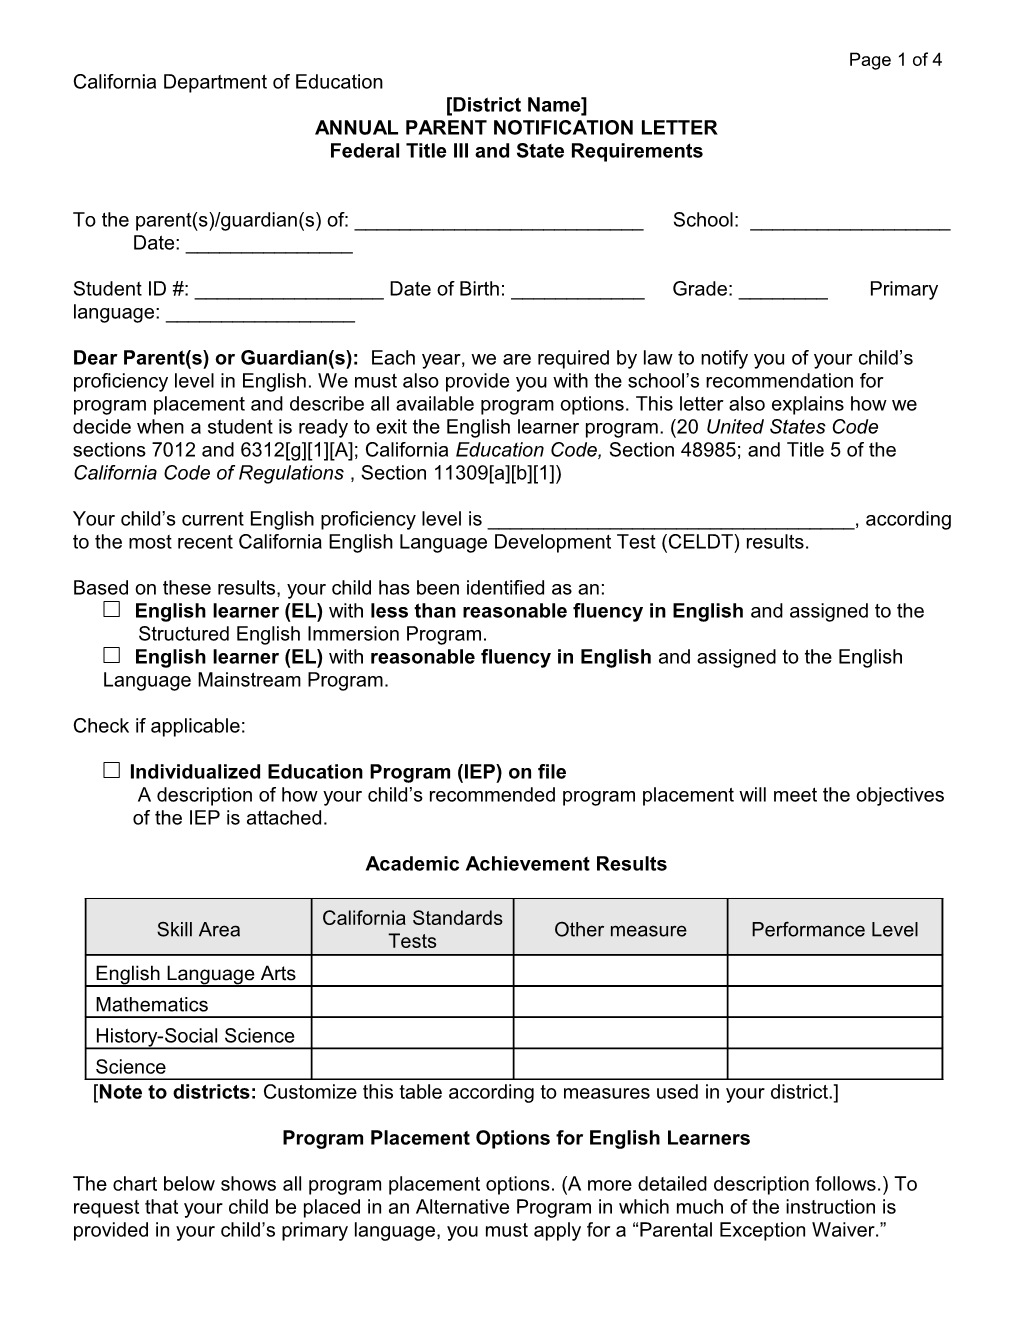 Annual Parent Notification Letter - Title III (CA Dept of Education)